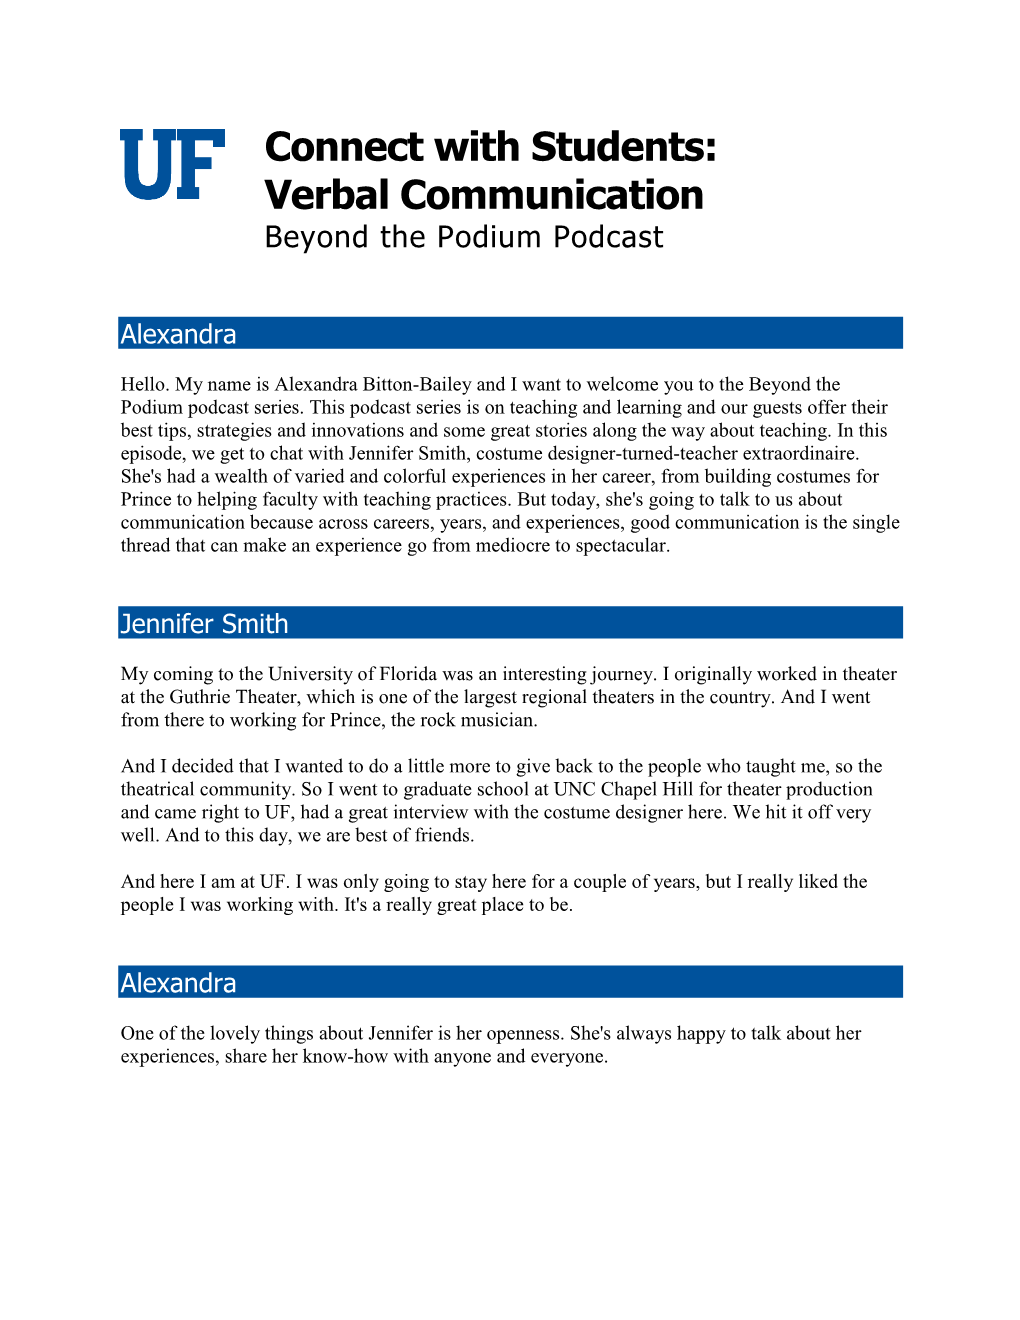 Connect with Students: Verbal Communication Transcript.Pdf